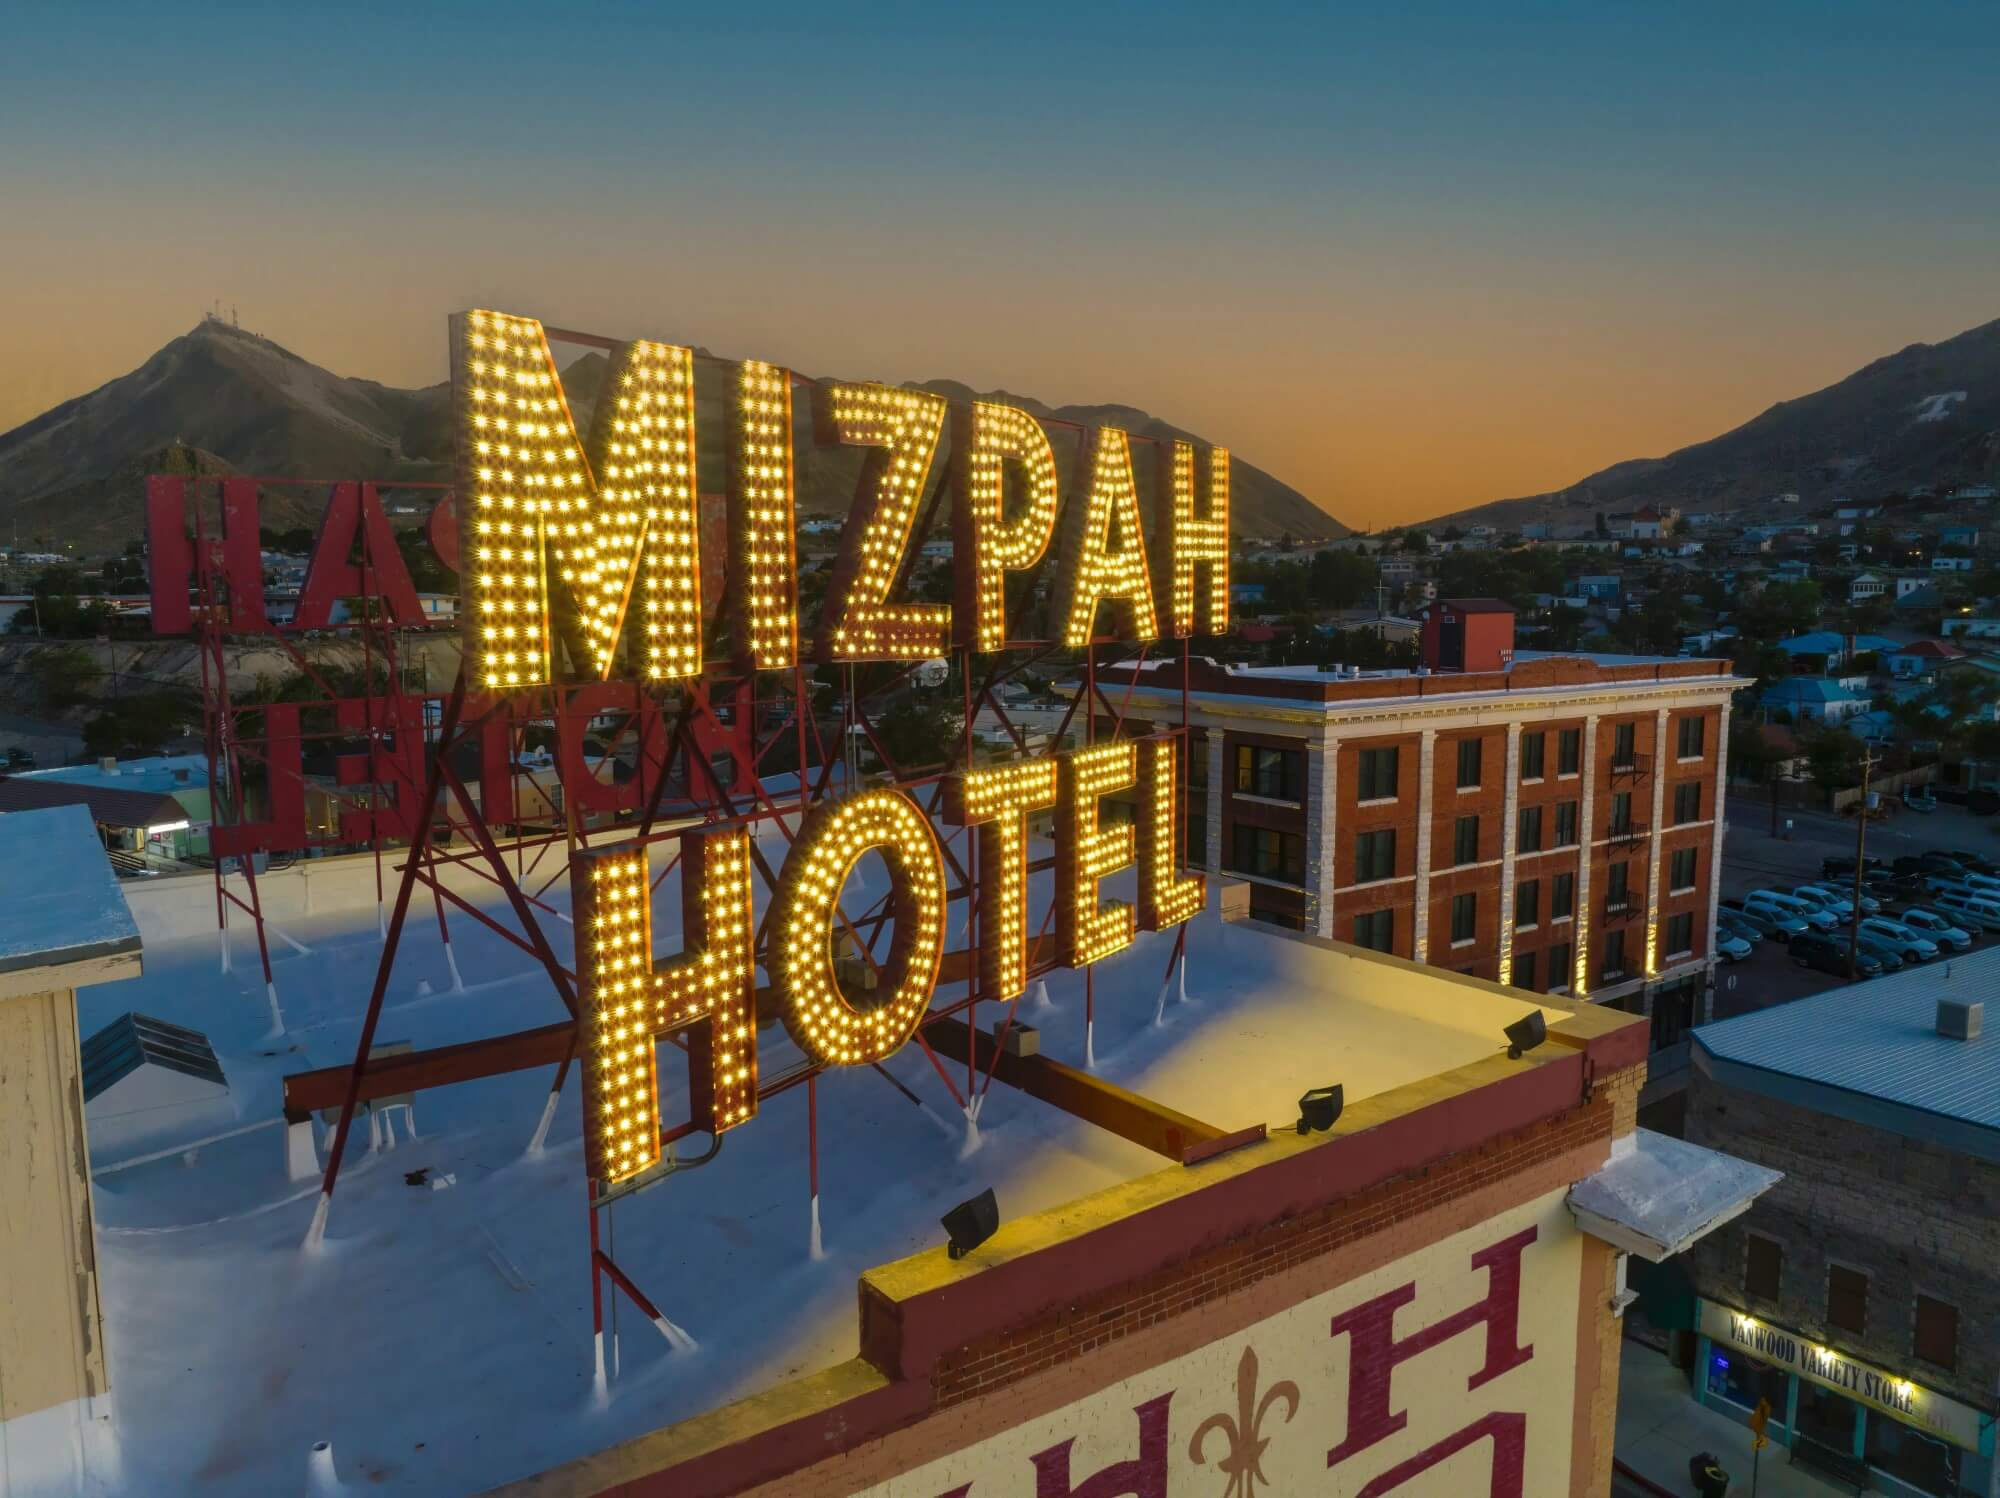 Whispers from the Past: A Psychic Medium's Encounter at “The Mizpah Hotel"